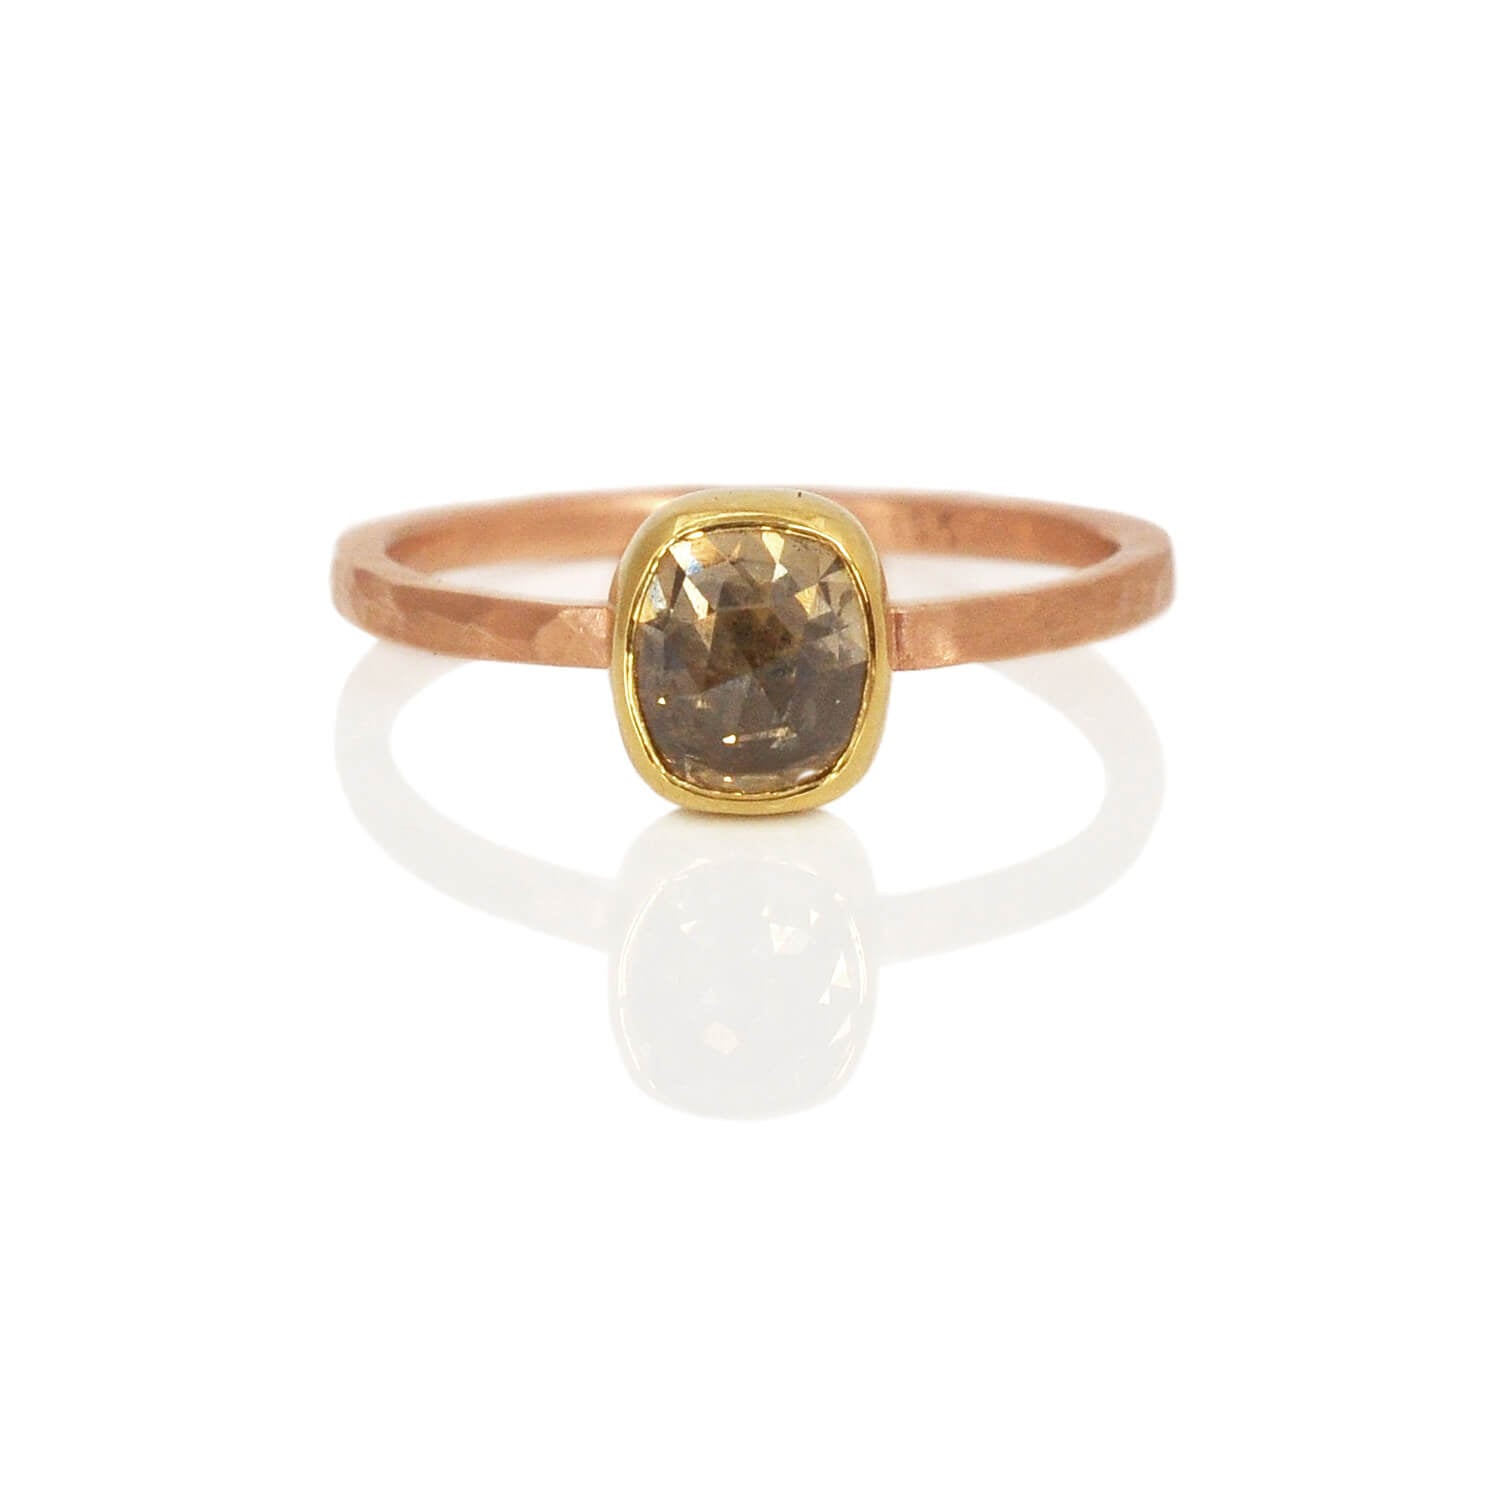 Handmade champagne diamond ring in red and yellow gold. Made with recycled metal and conflict-free stone. 